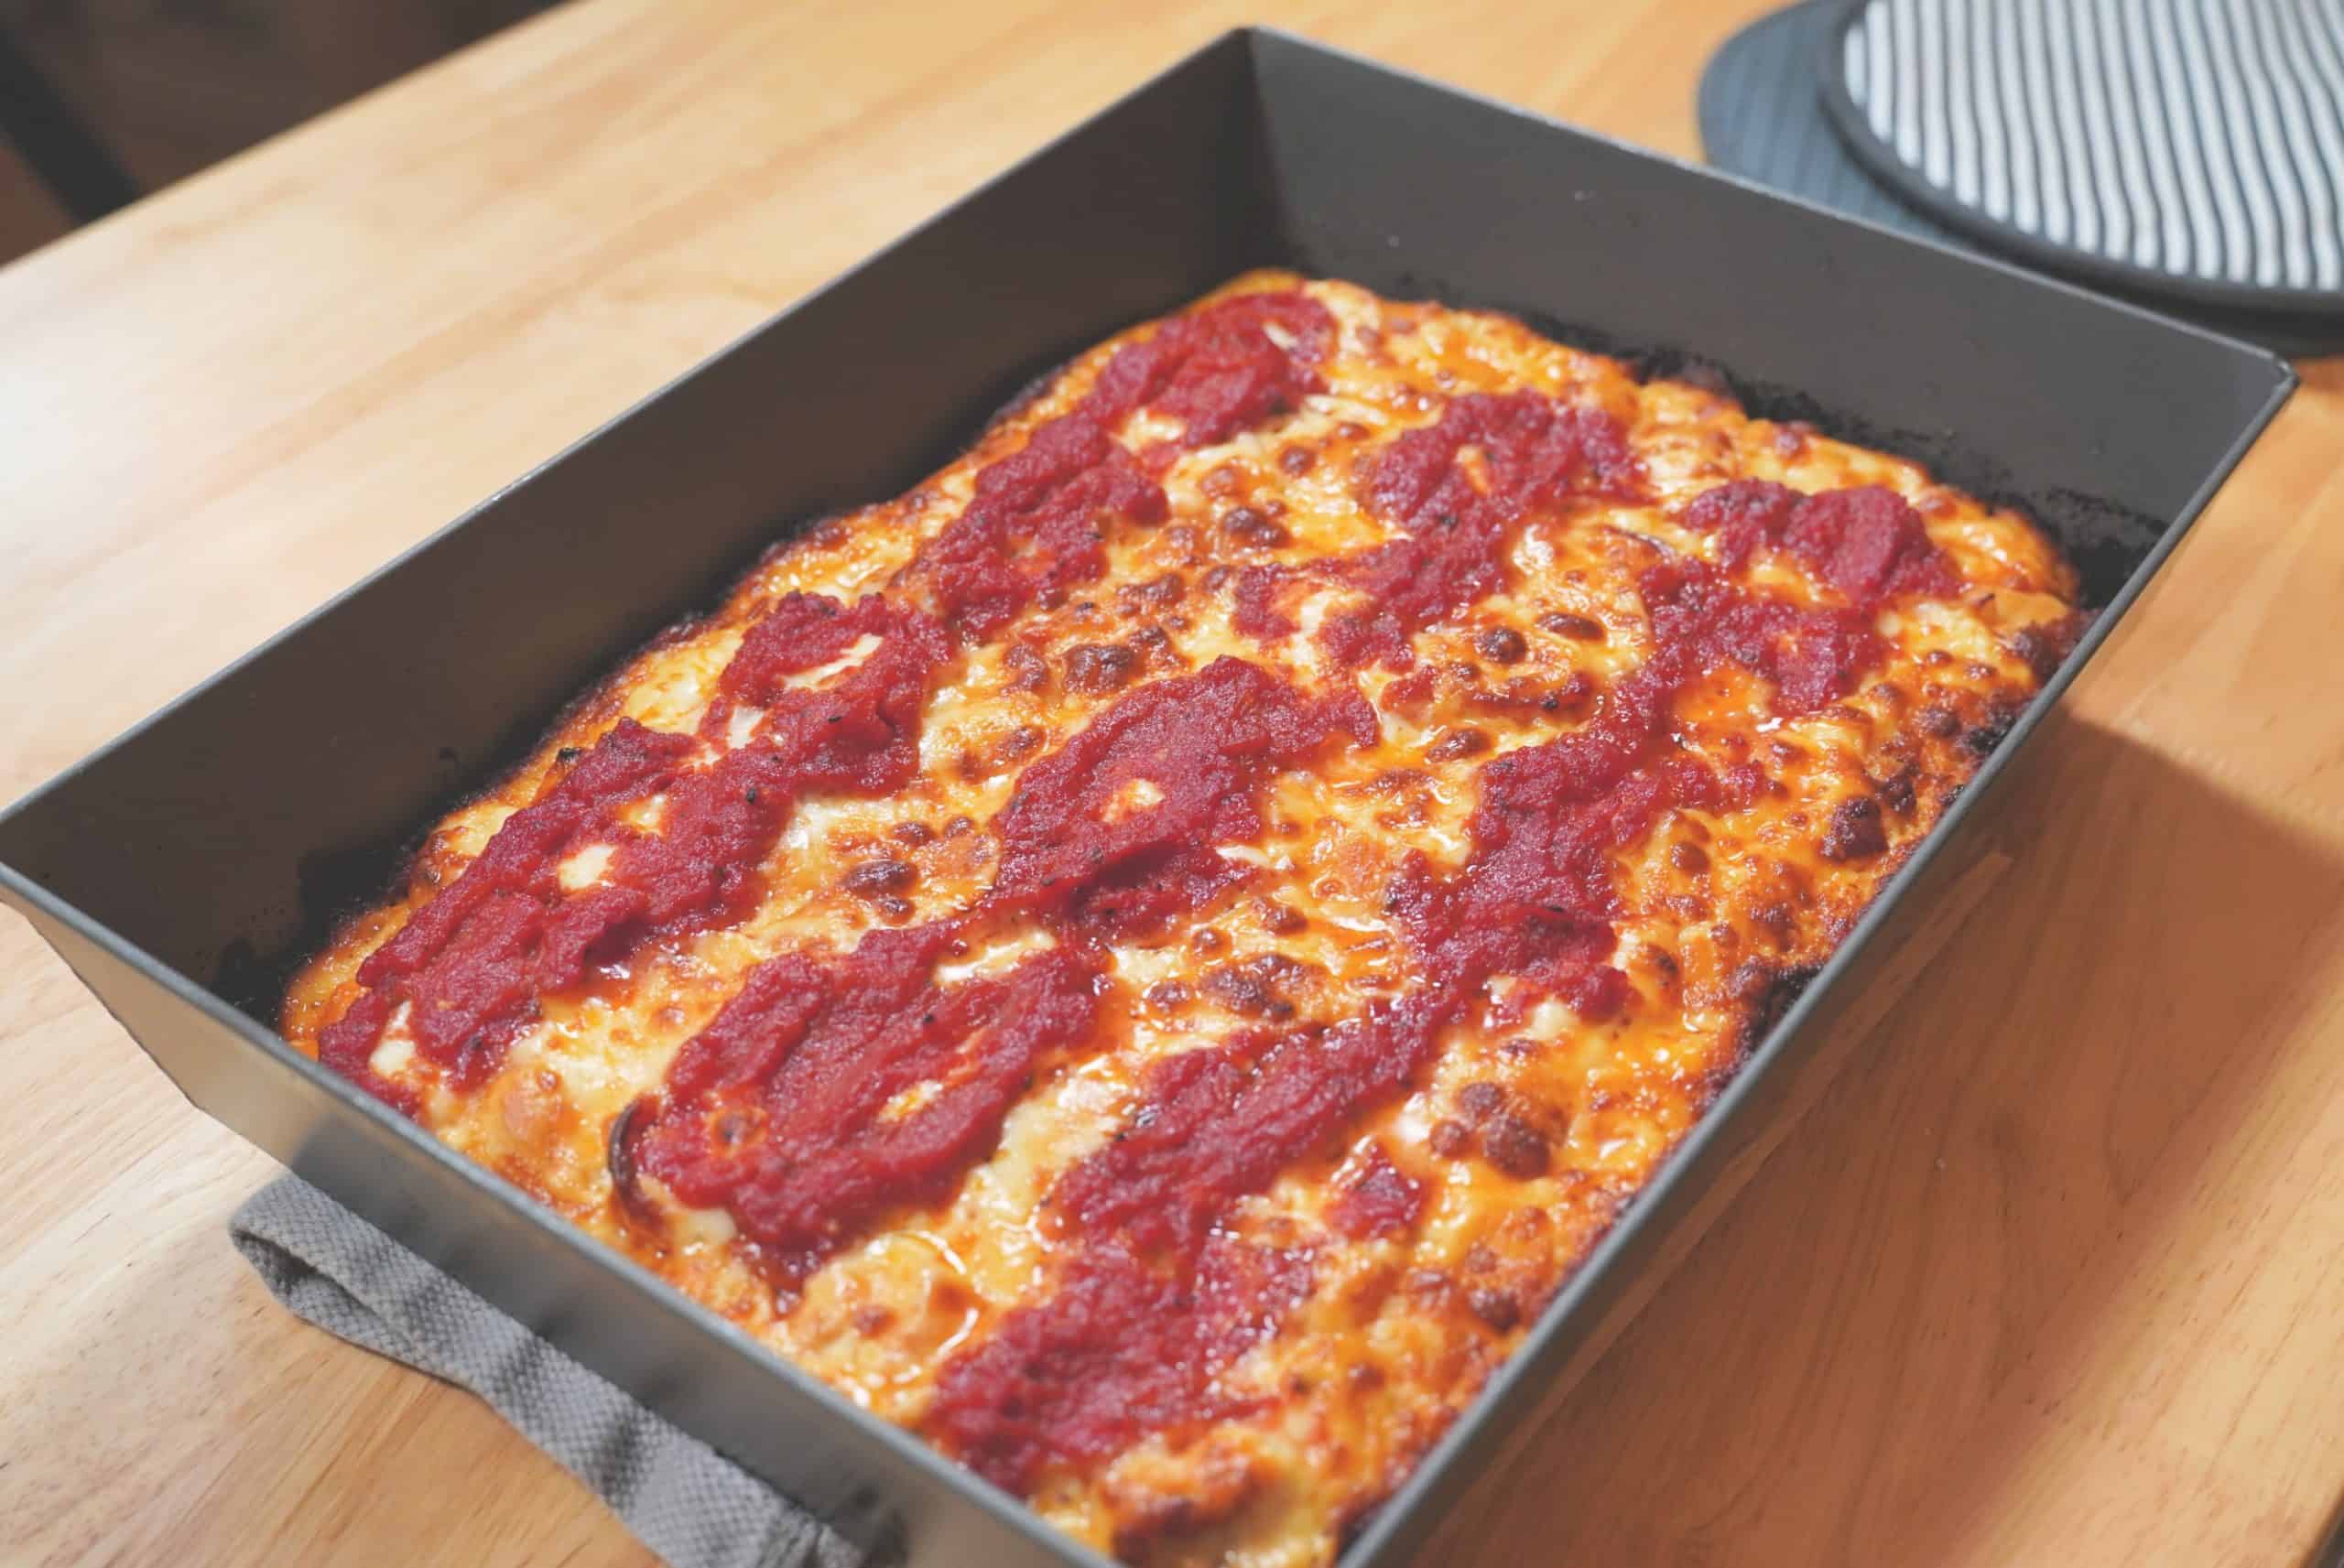 Homemade Detroit-style Pizza - Emmymade